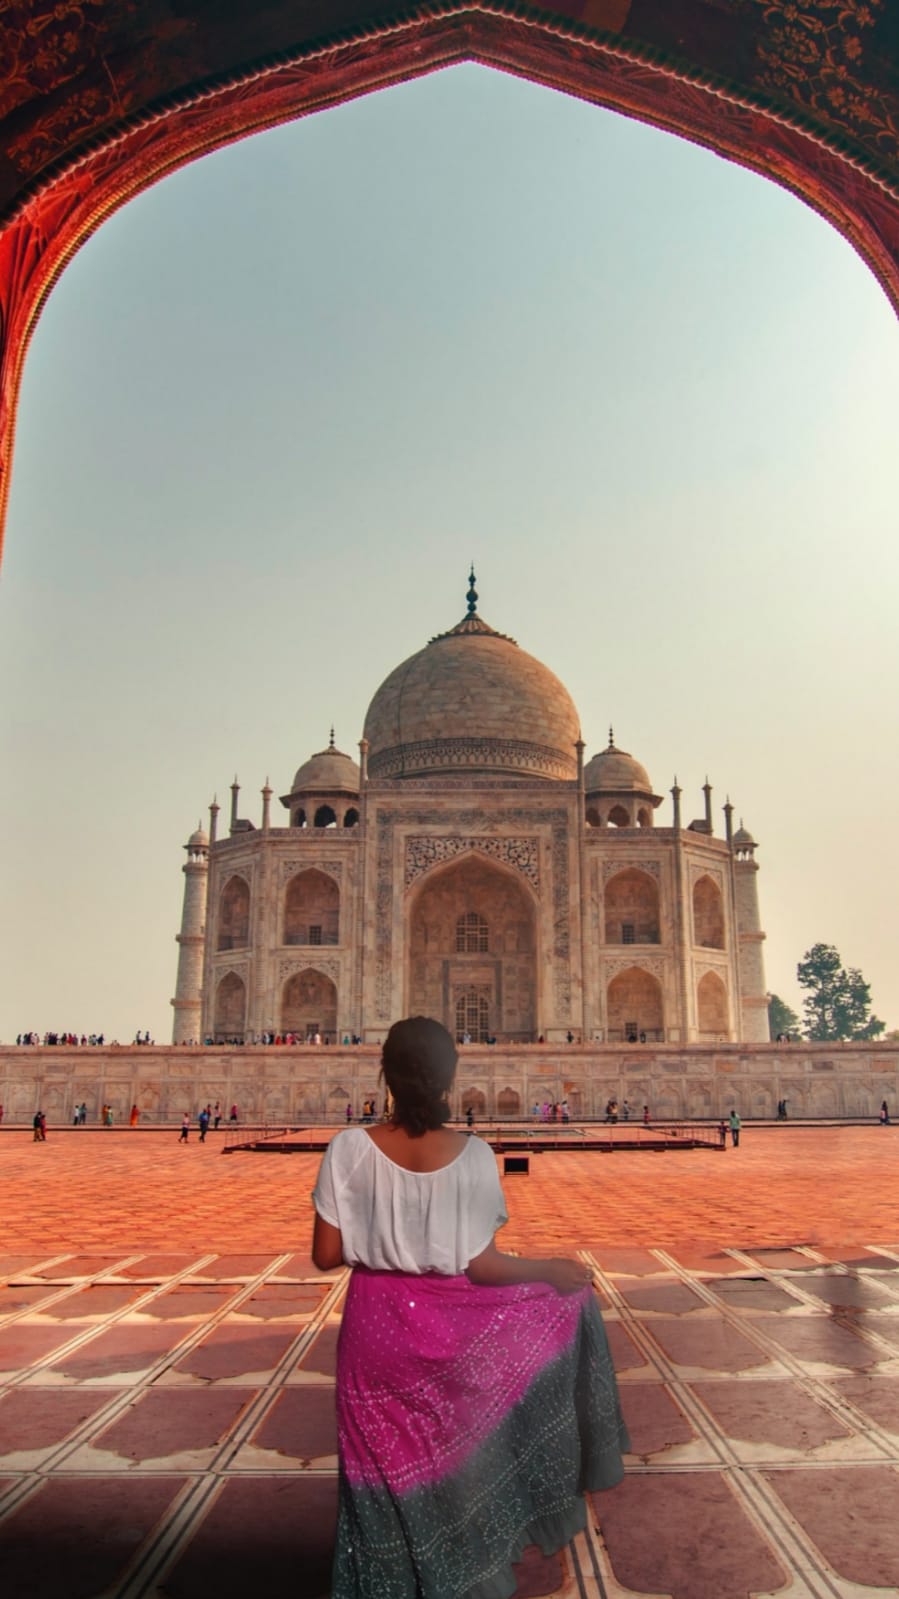 7 Facts About The Taj Mahal, India 